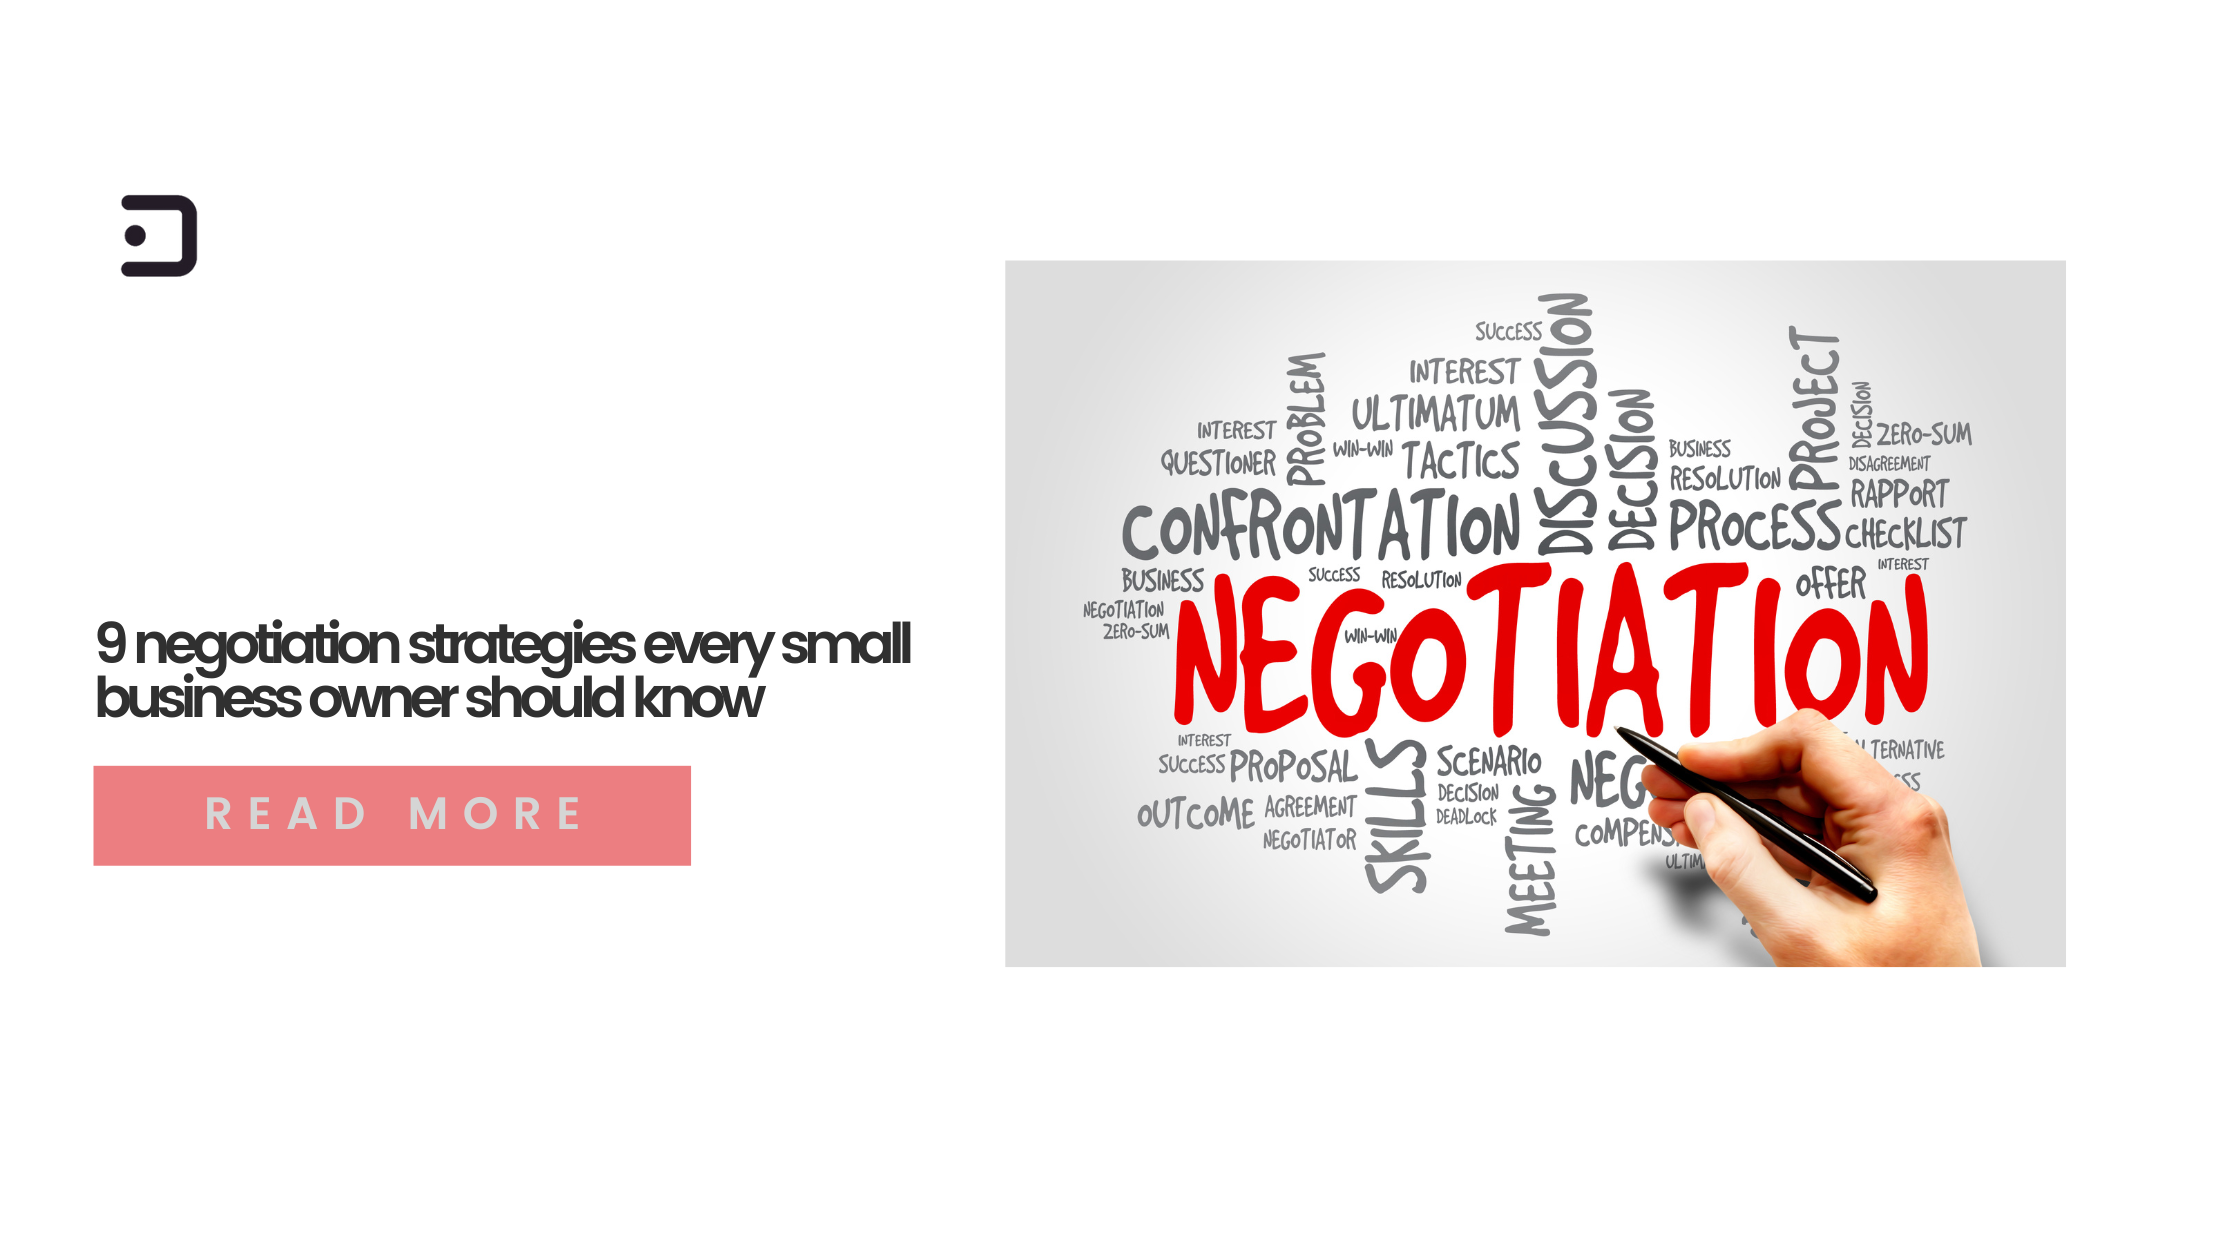 9 negotiation strategies every small business owner should know - Dukka